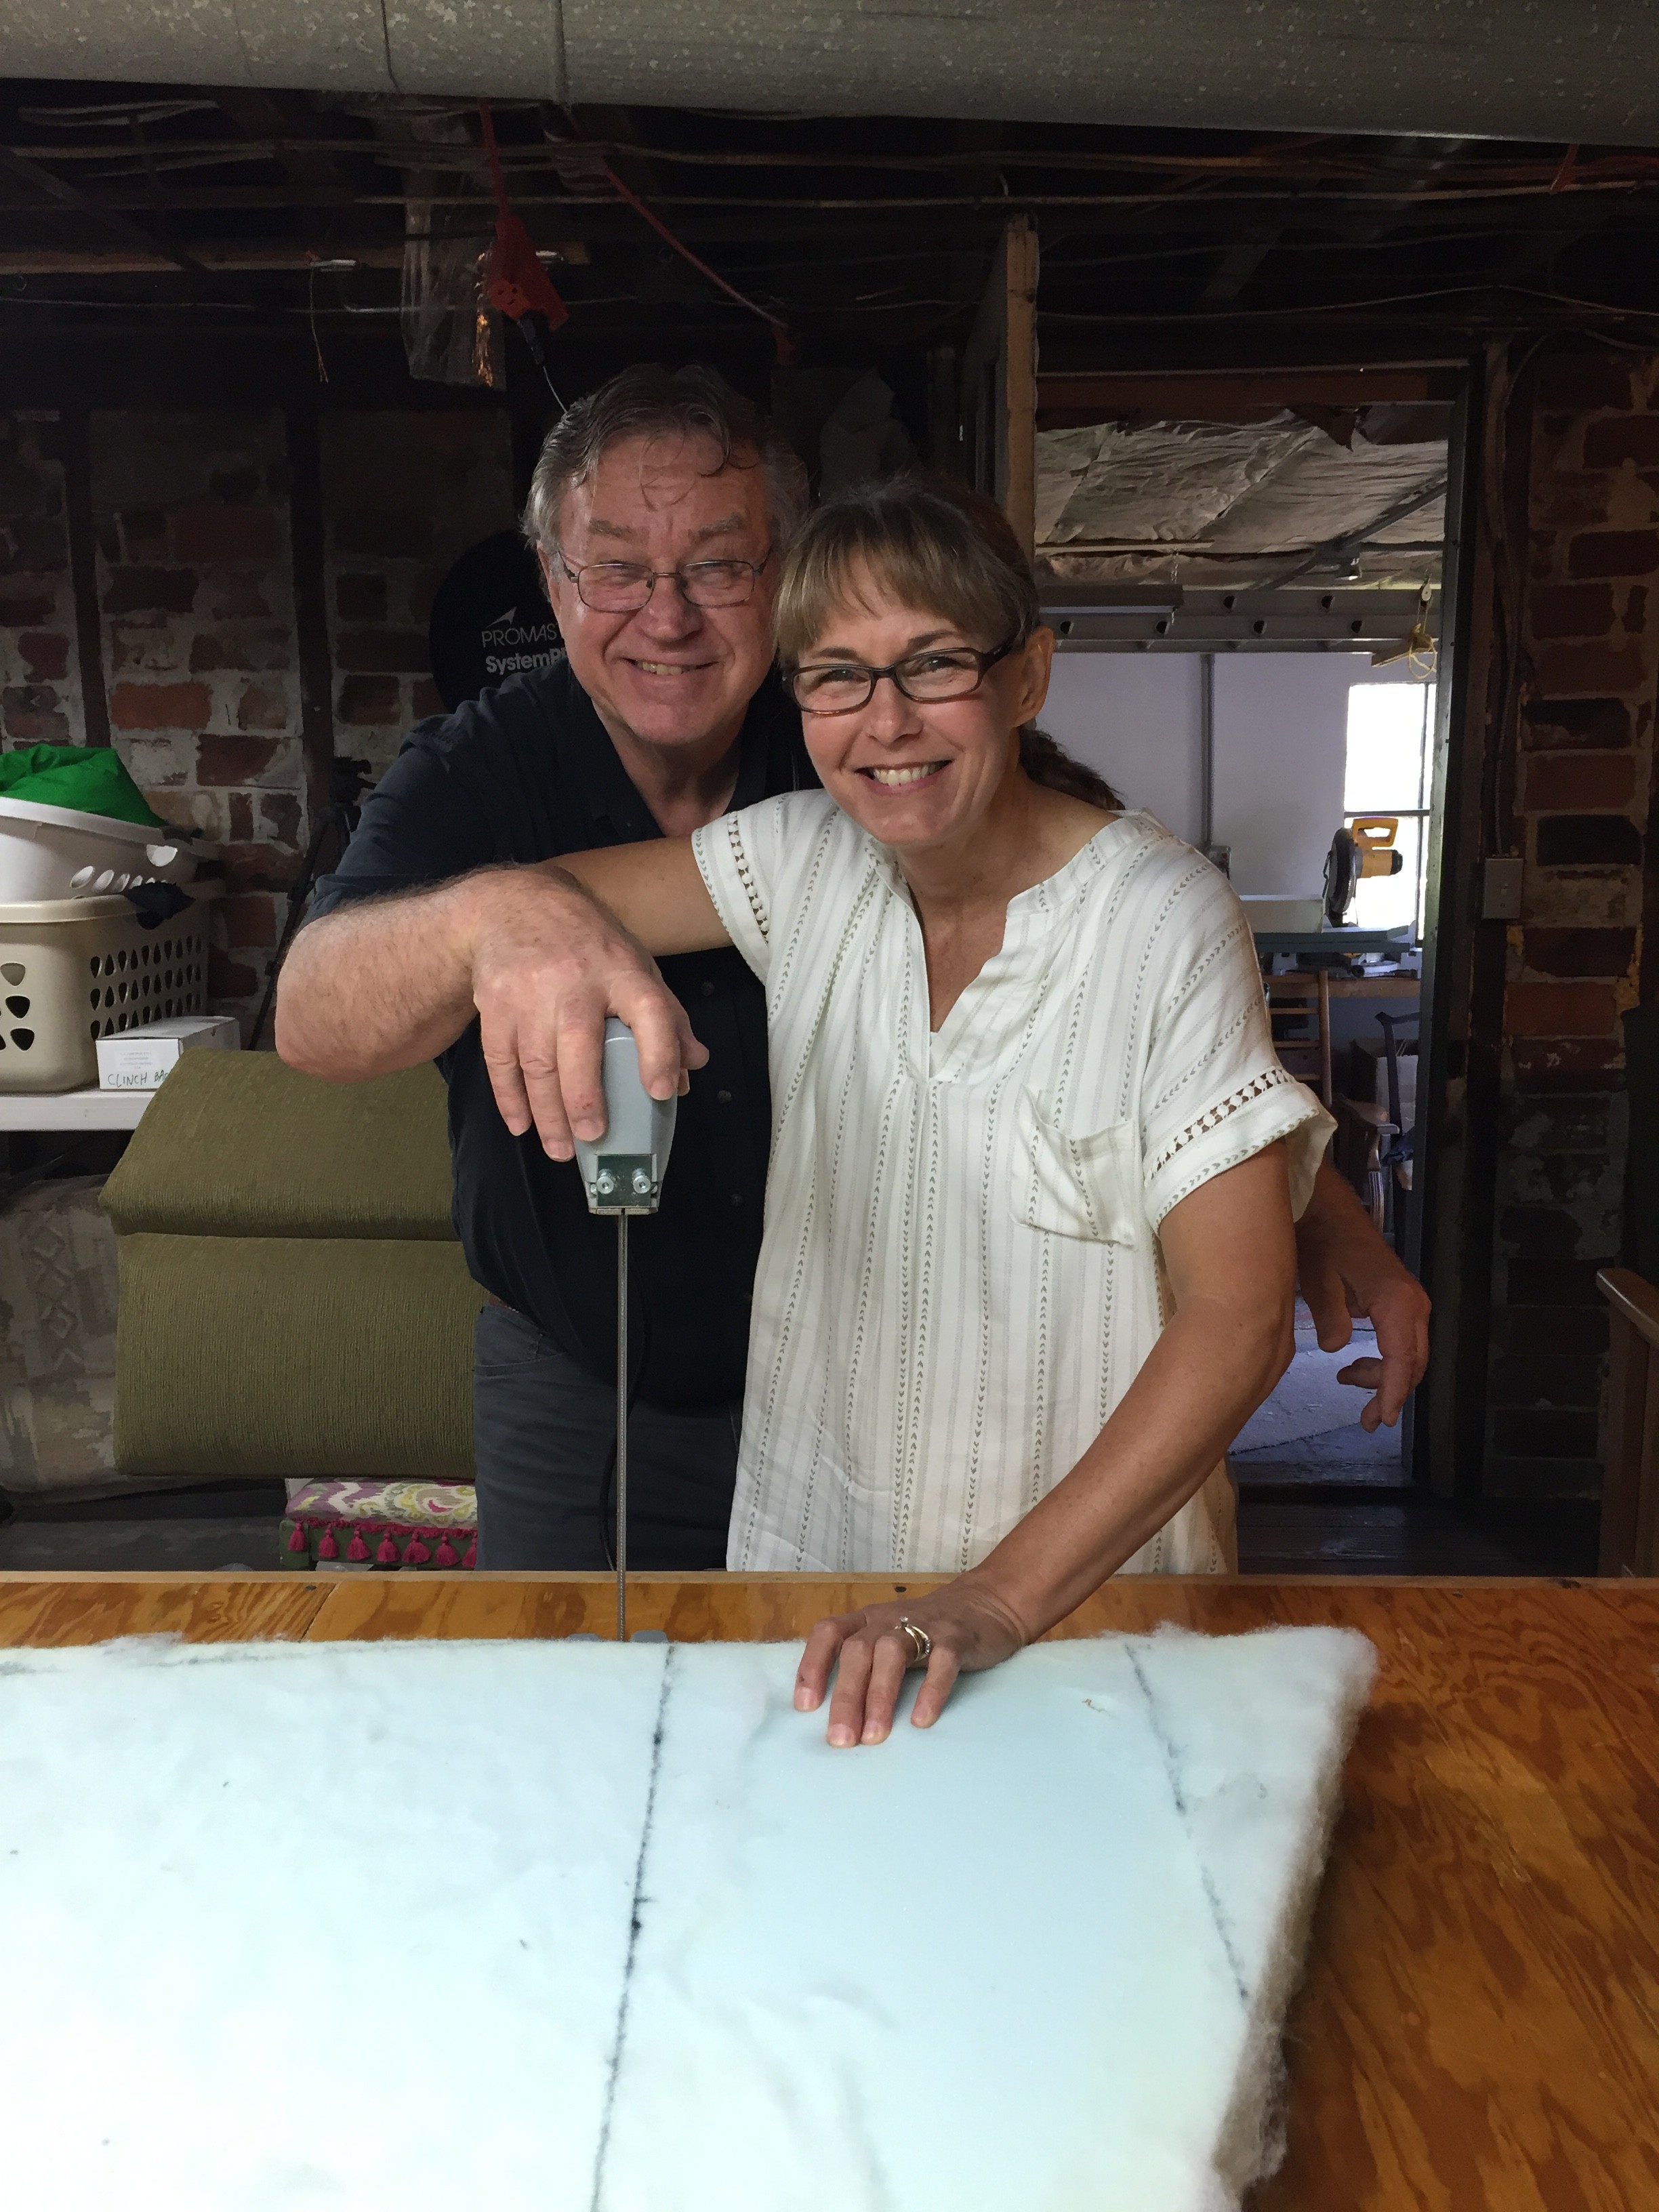 Bill shows Tracy how to use the foam saw